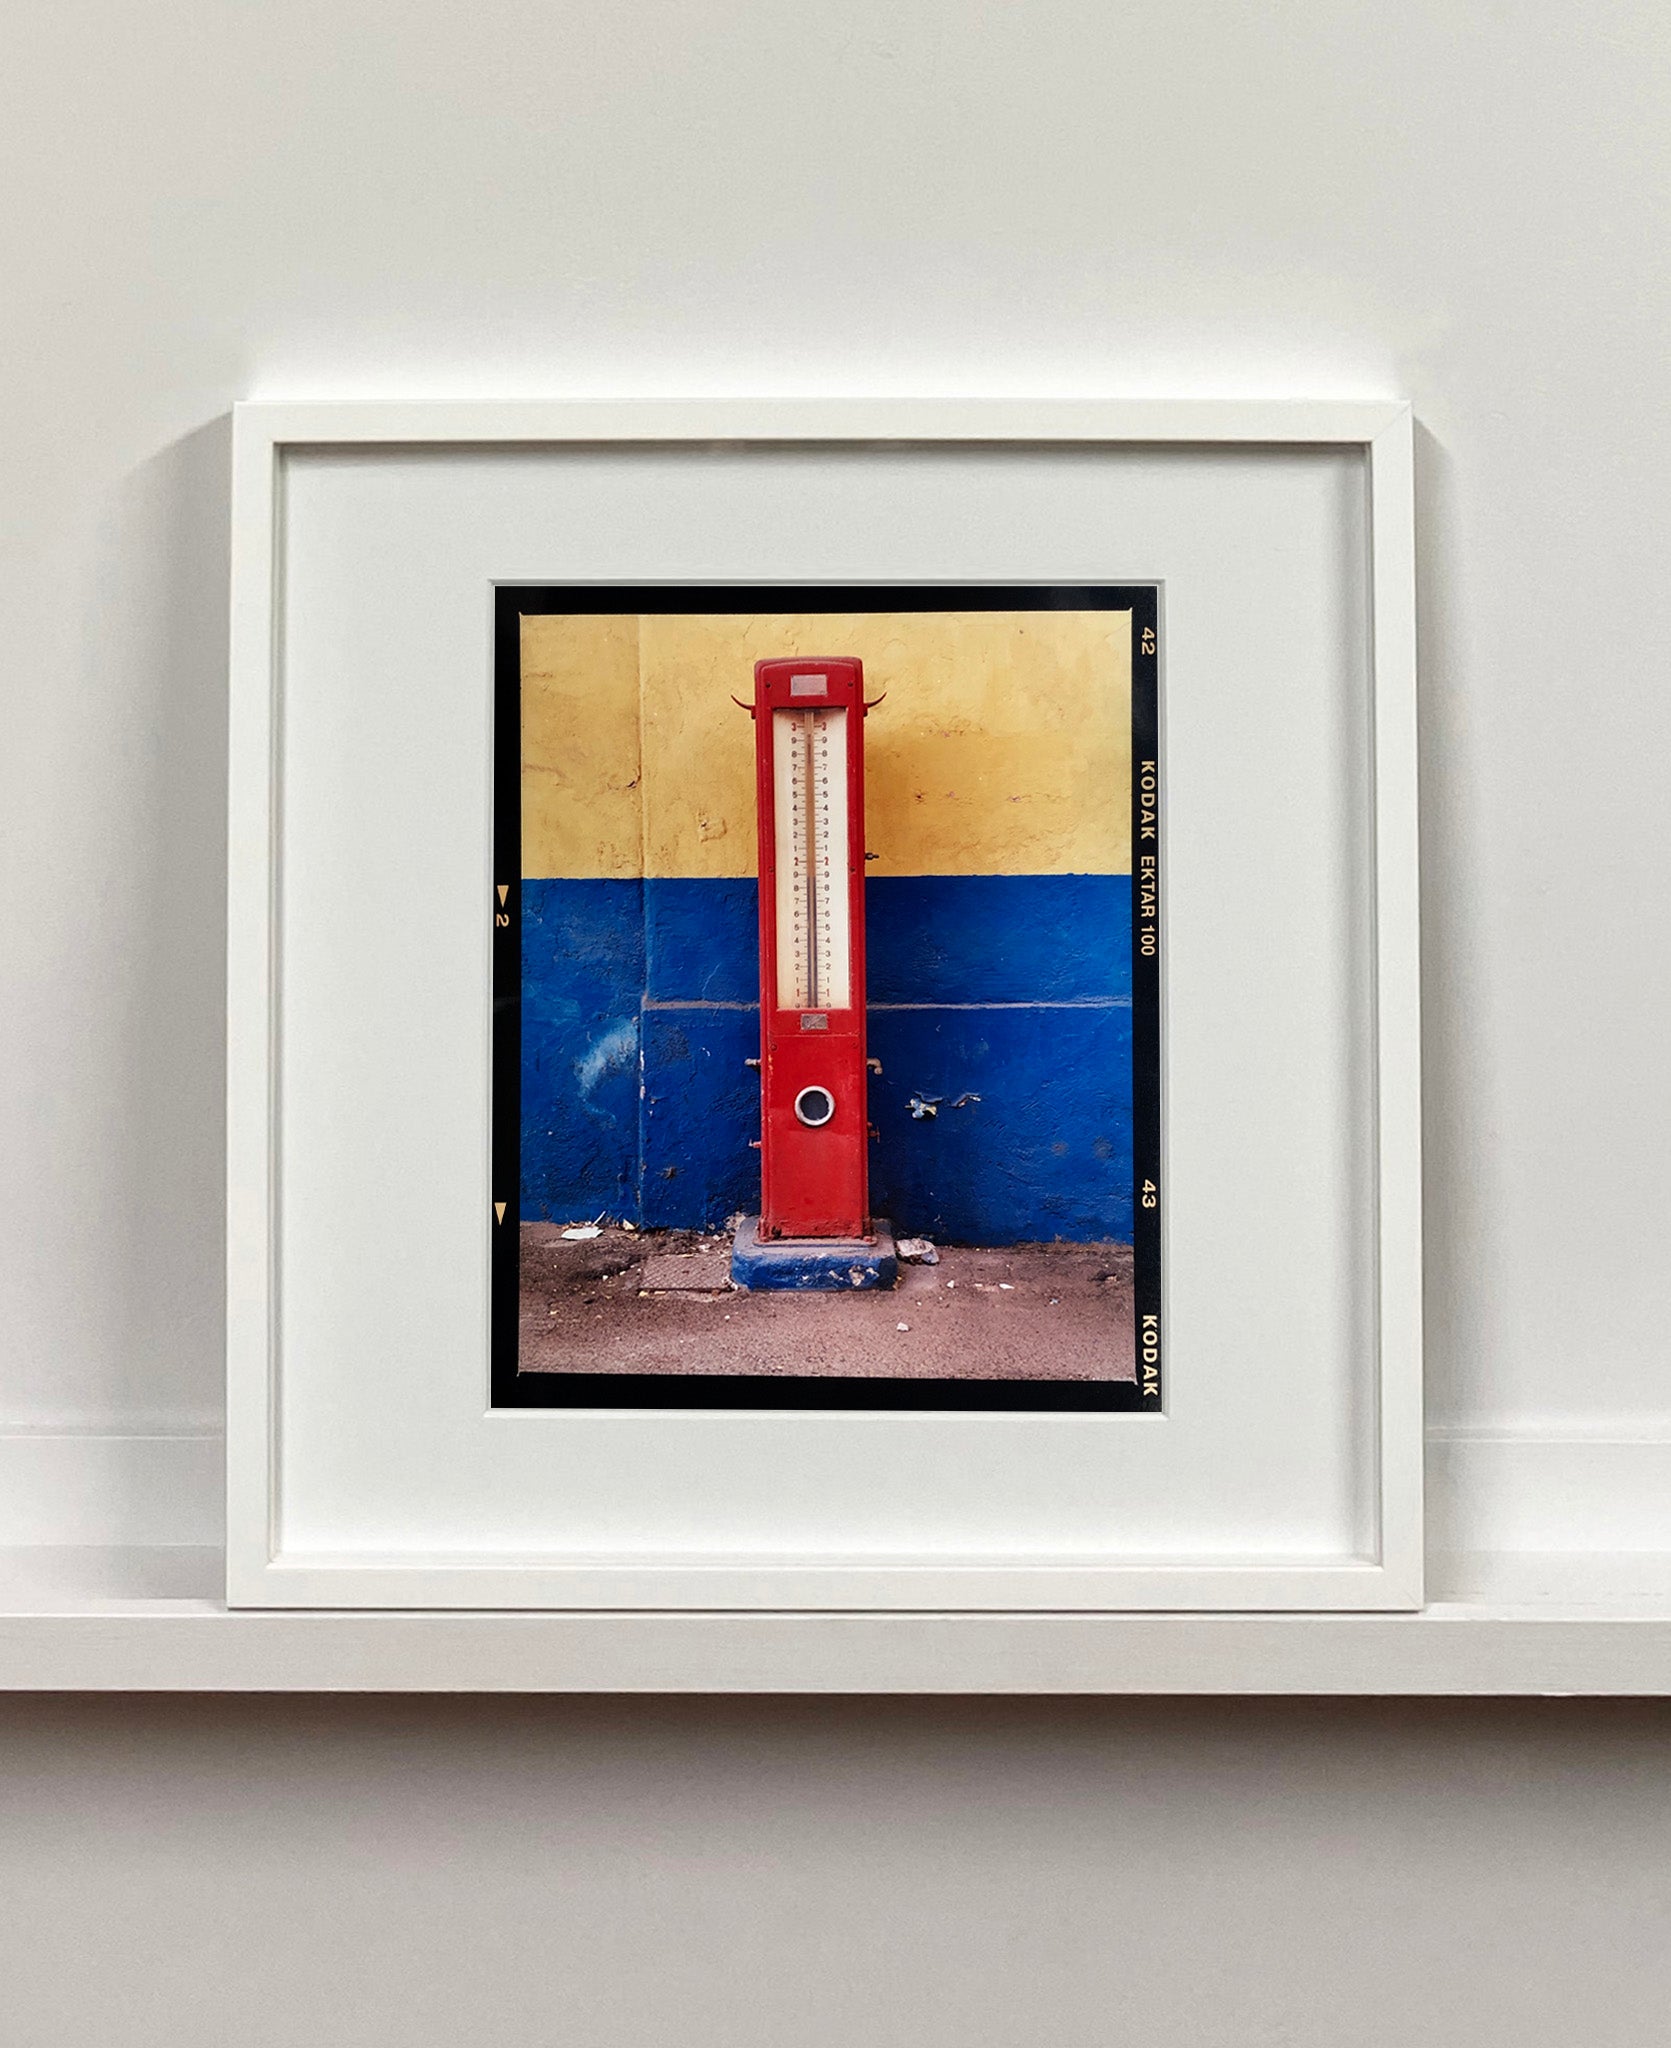 A red retro tyre pump against a yellow and blue painted wall, in the Porta Genova area of Milan.